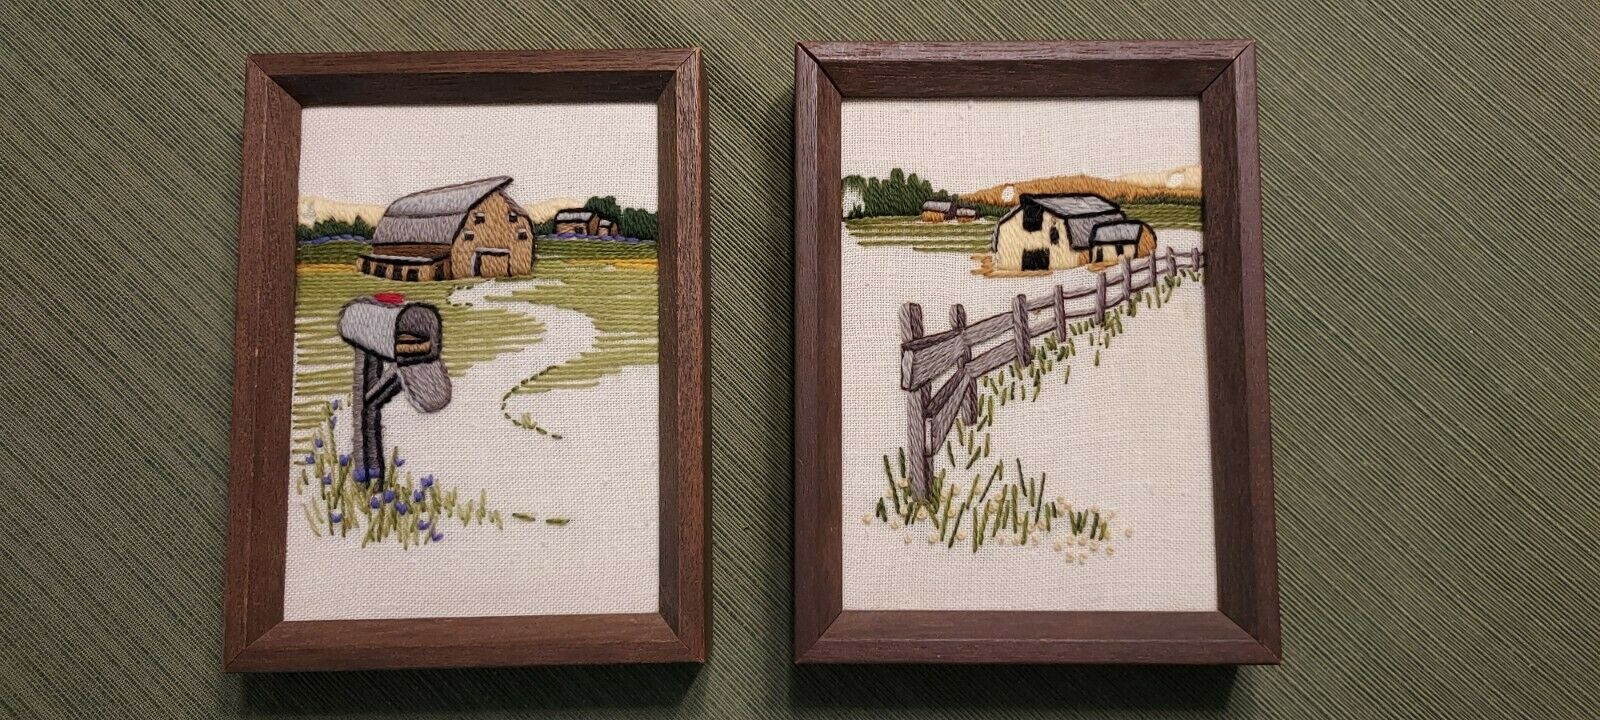 Framed 815 R.f.d. #1 And Pasture Fence 8" X 6" Sunset Designs, Inc.